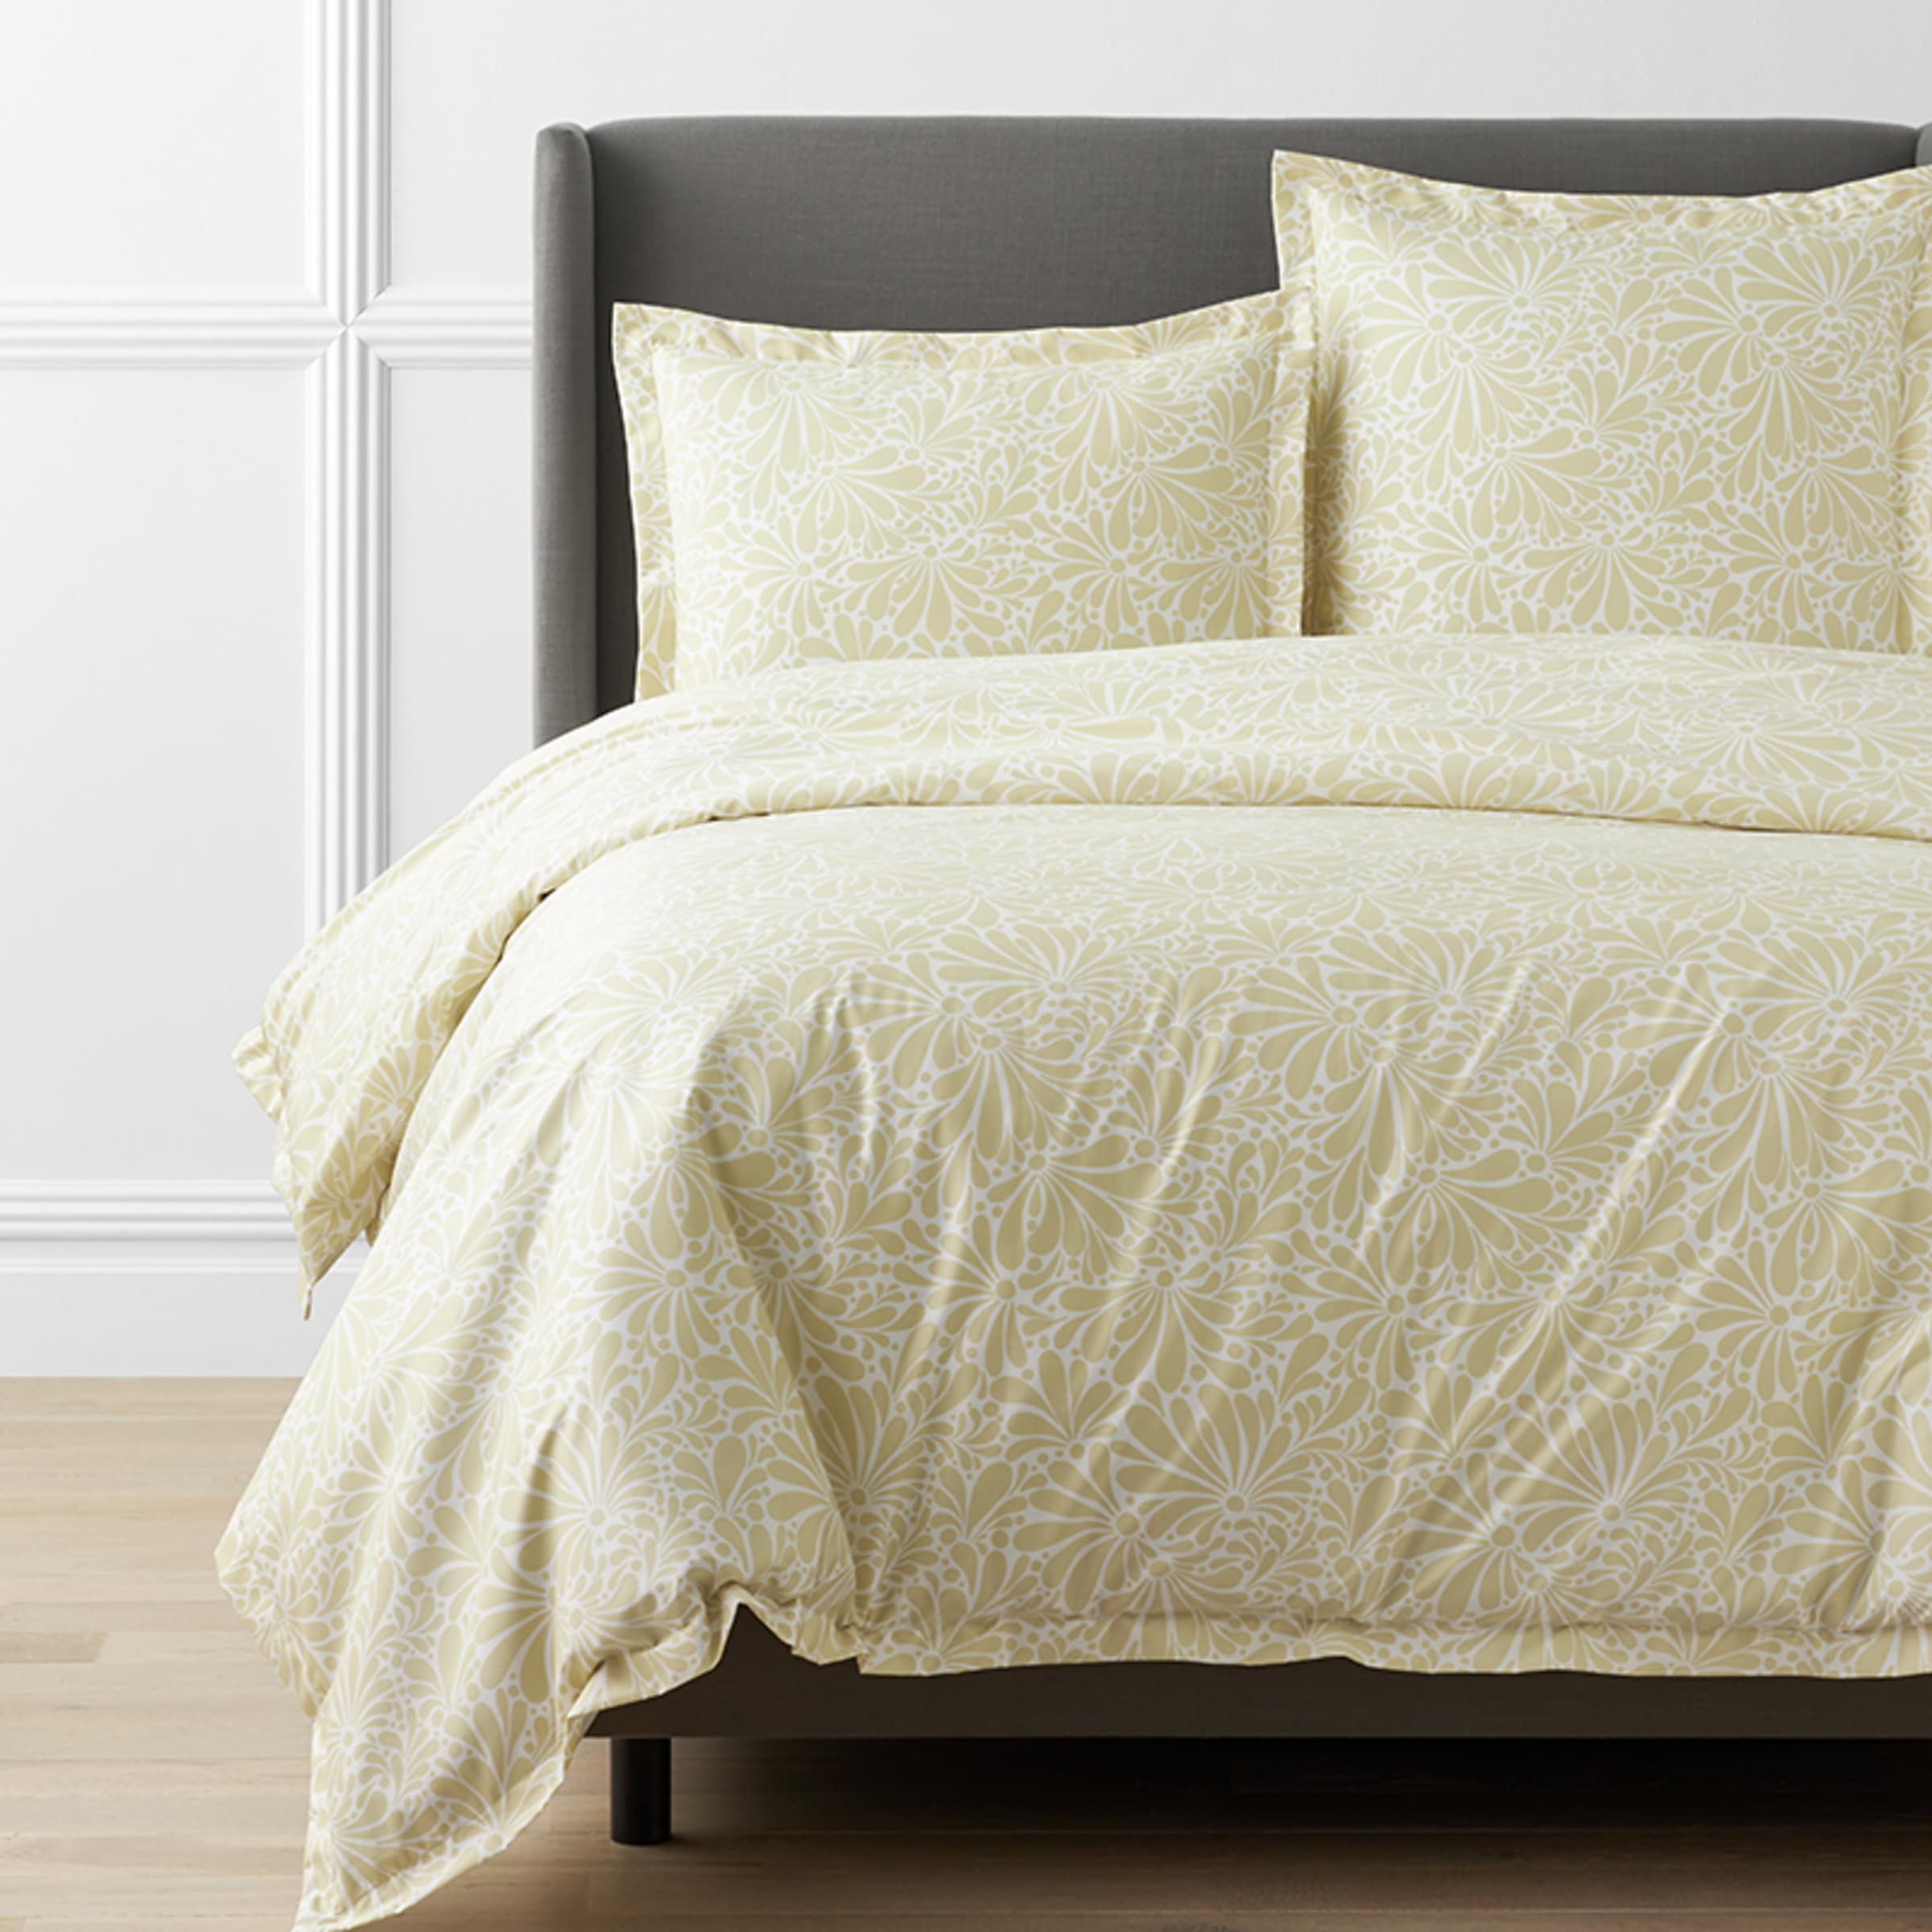 Legends Hotel™ Lila Wrinkle-Free Sateen Duvet Cover | The Company Store